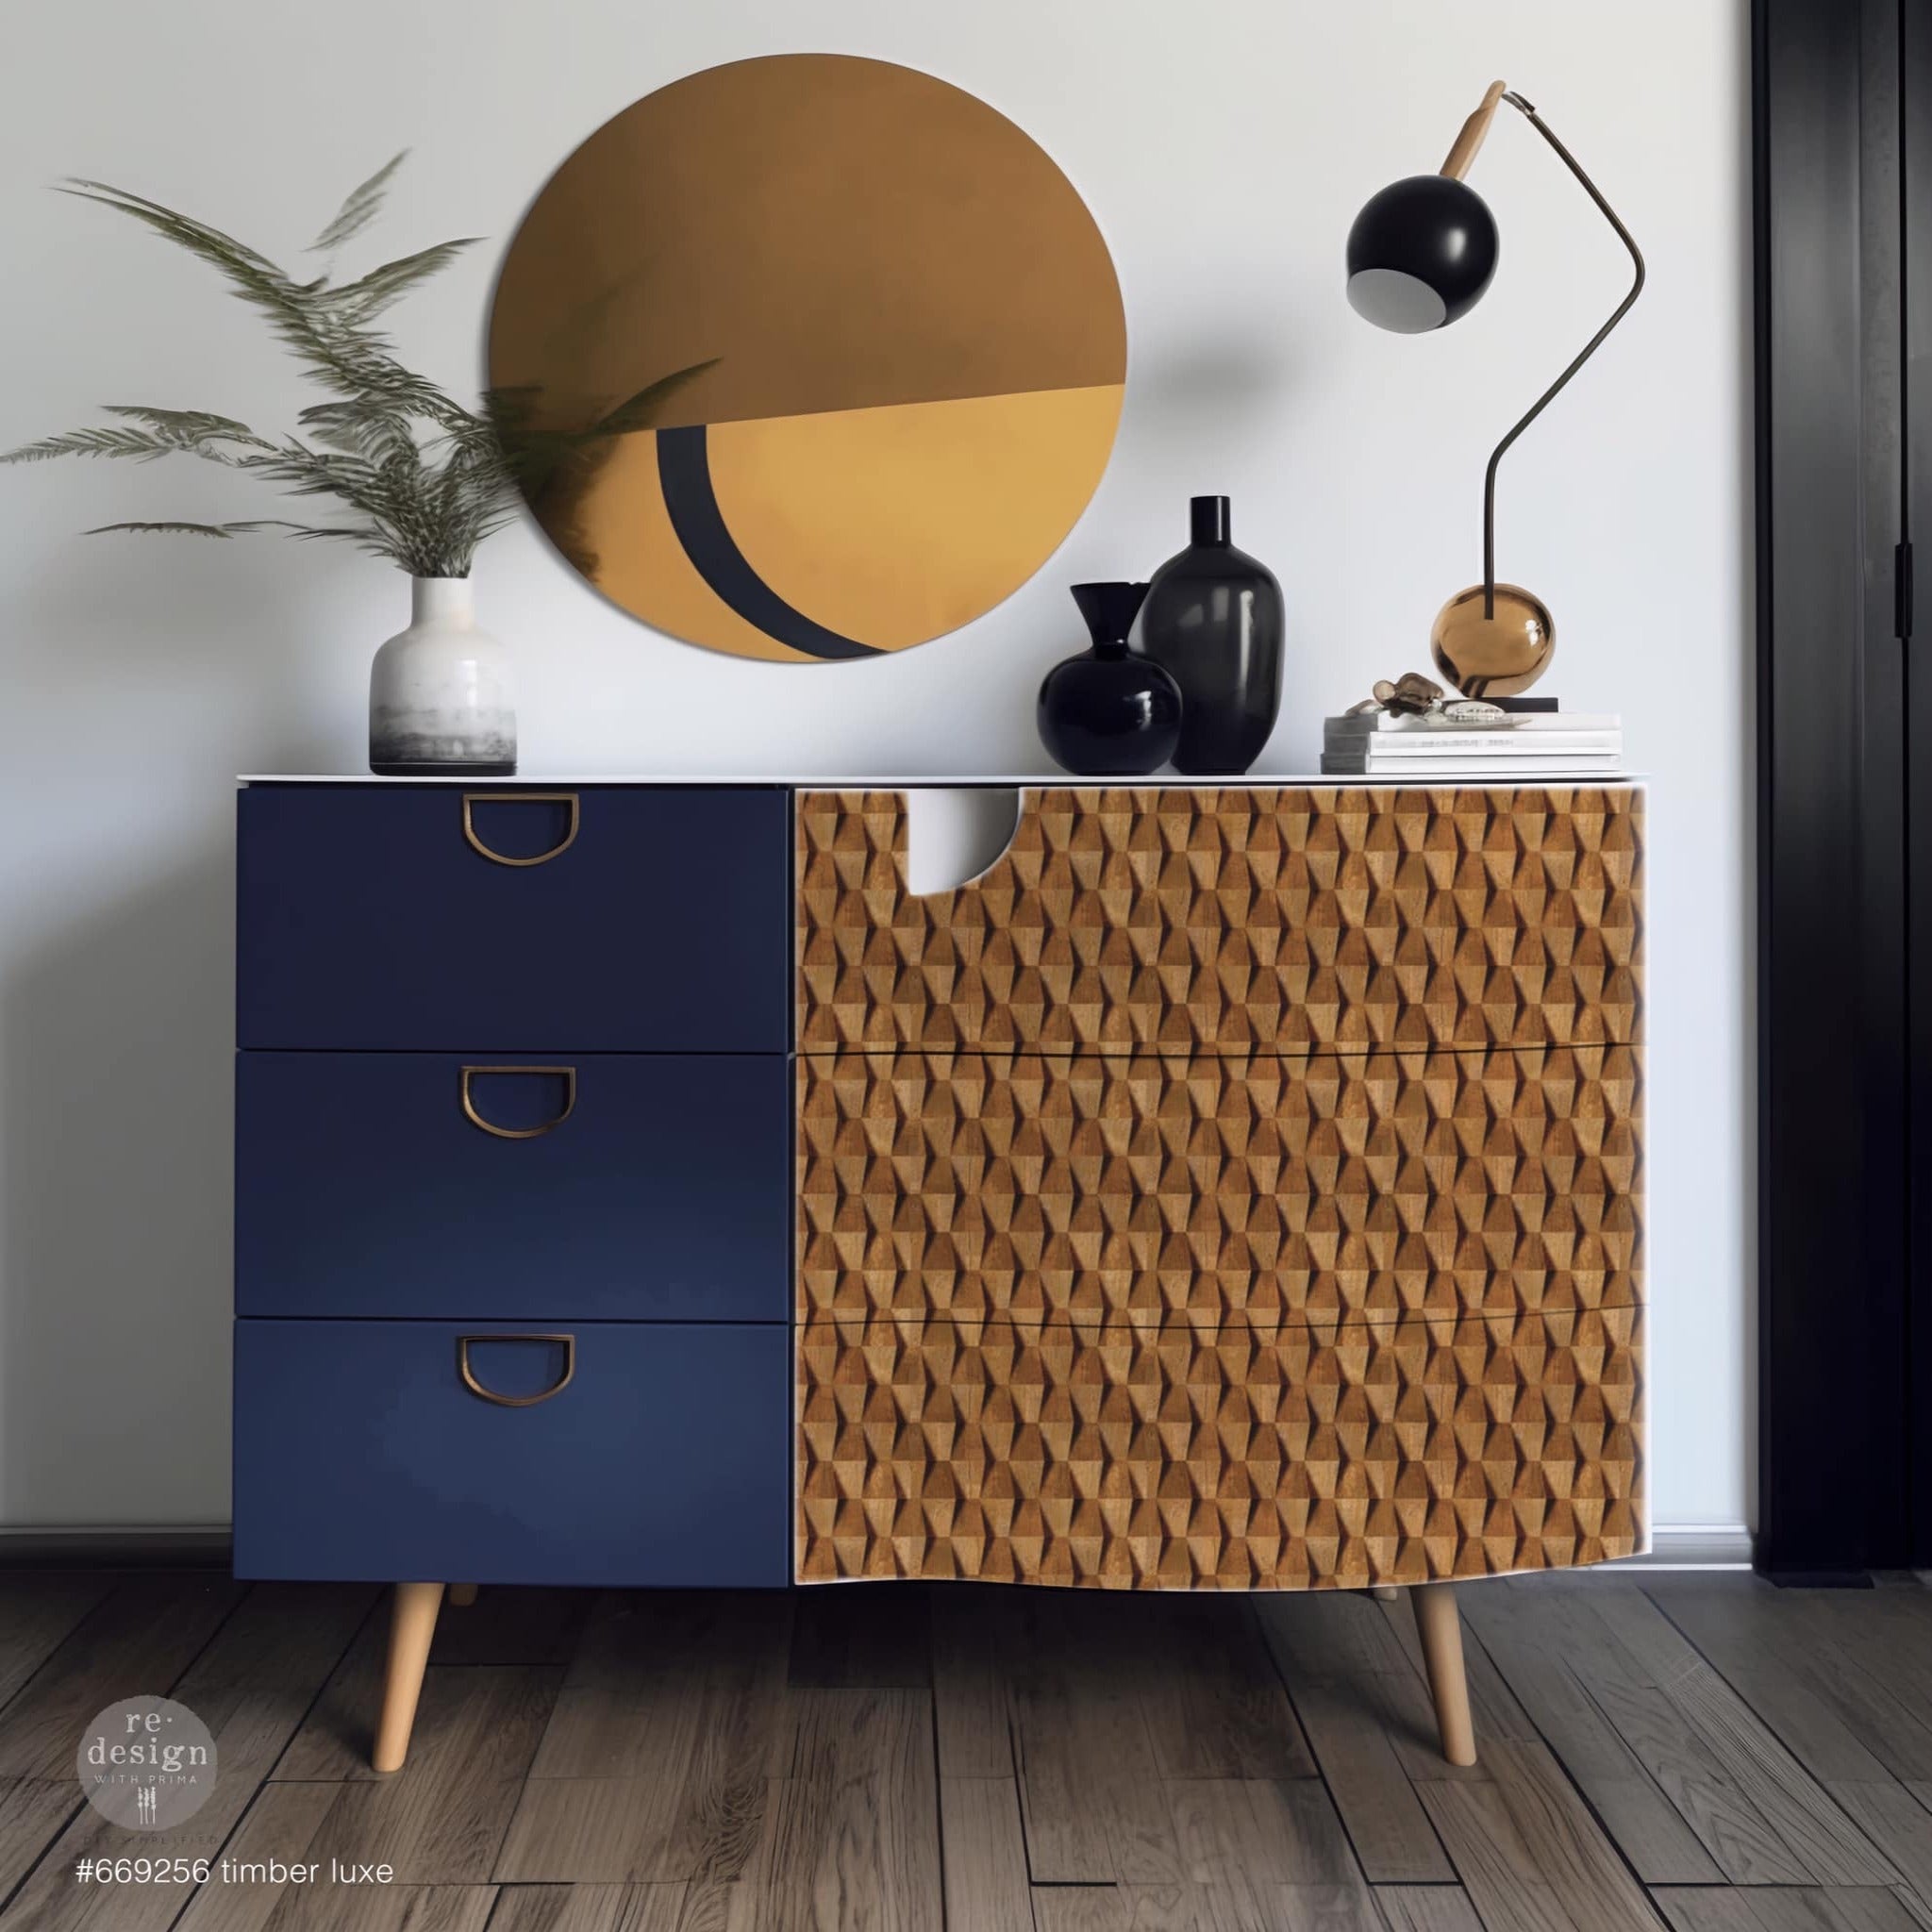 A mid-century 6-drawer dresser has 3 navy blue small drawers to the left and 3 larger drawers on the right that feature ReDesign with Prima's Timber Luxe A1 fiber paper.